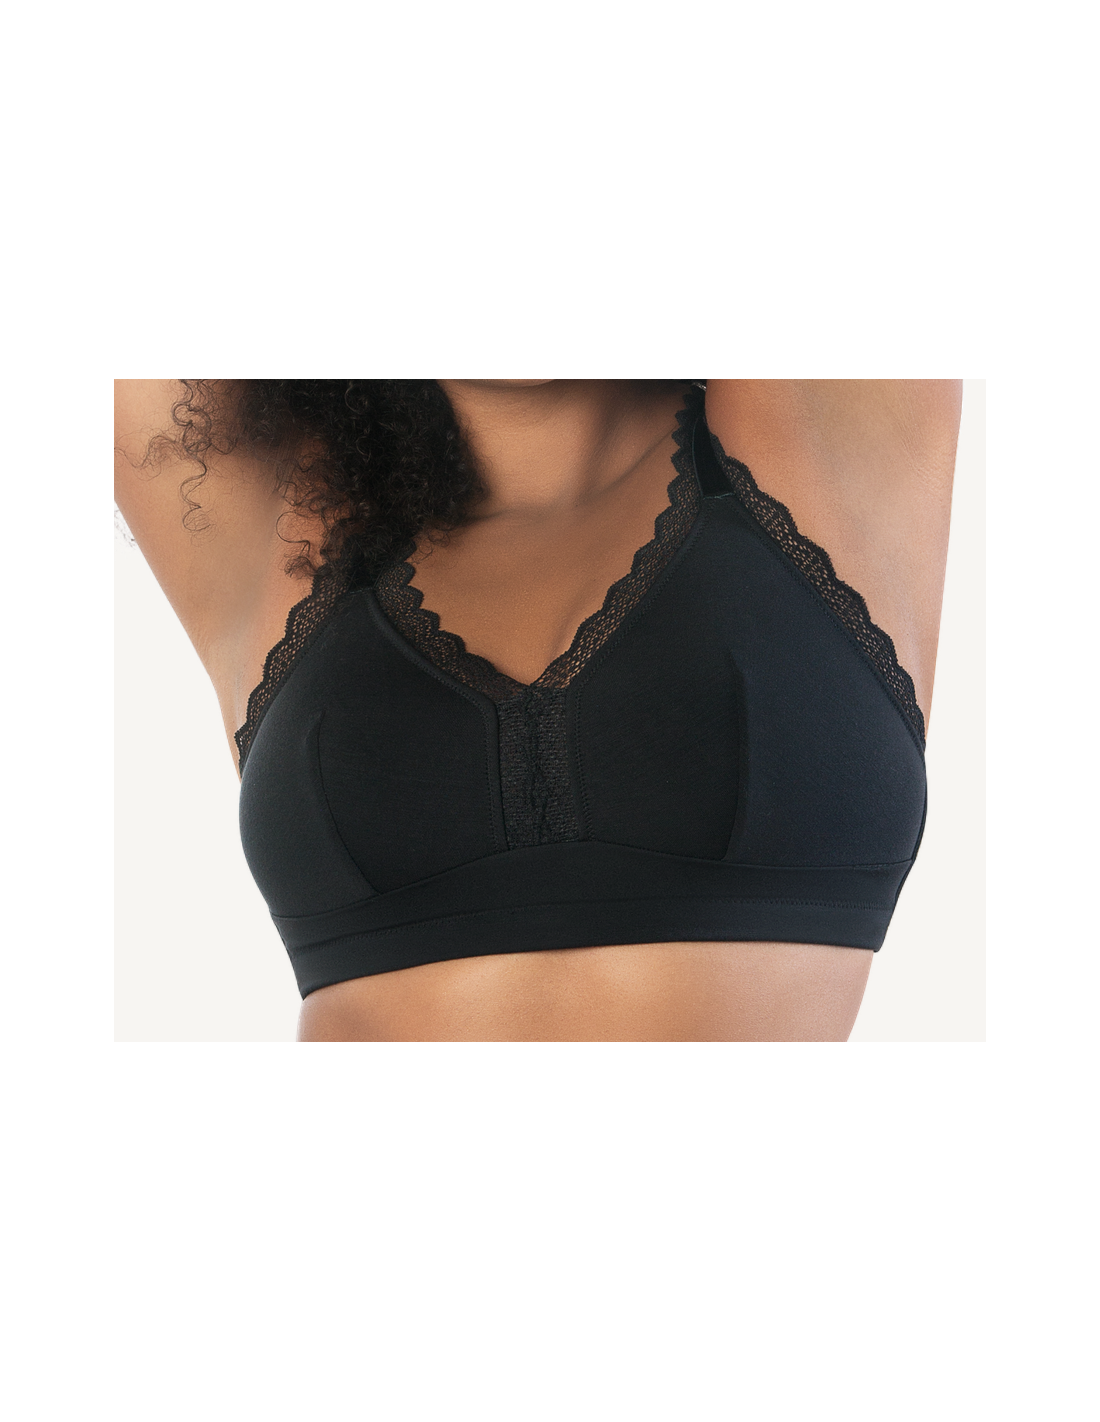 Bralette Bralette Without Underwire Comfortable Fabric Back Hooks